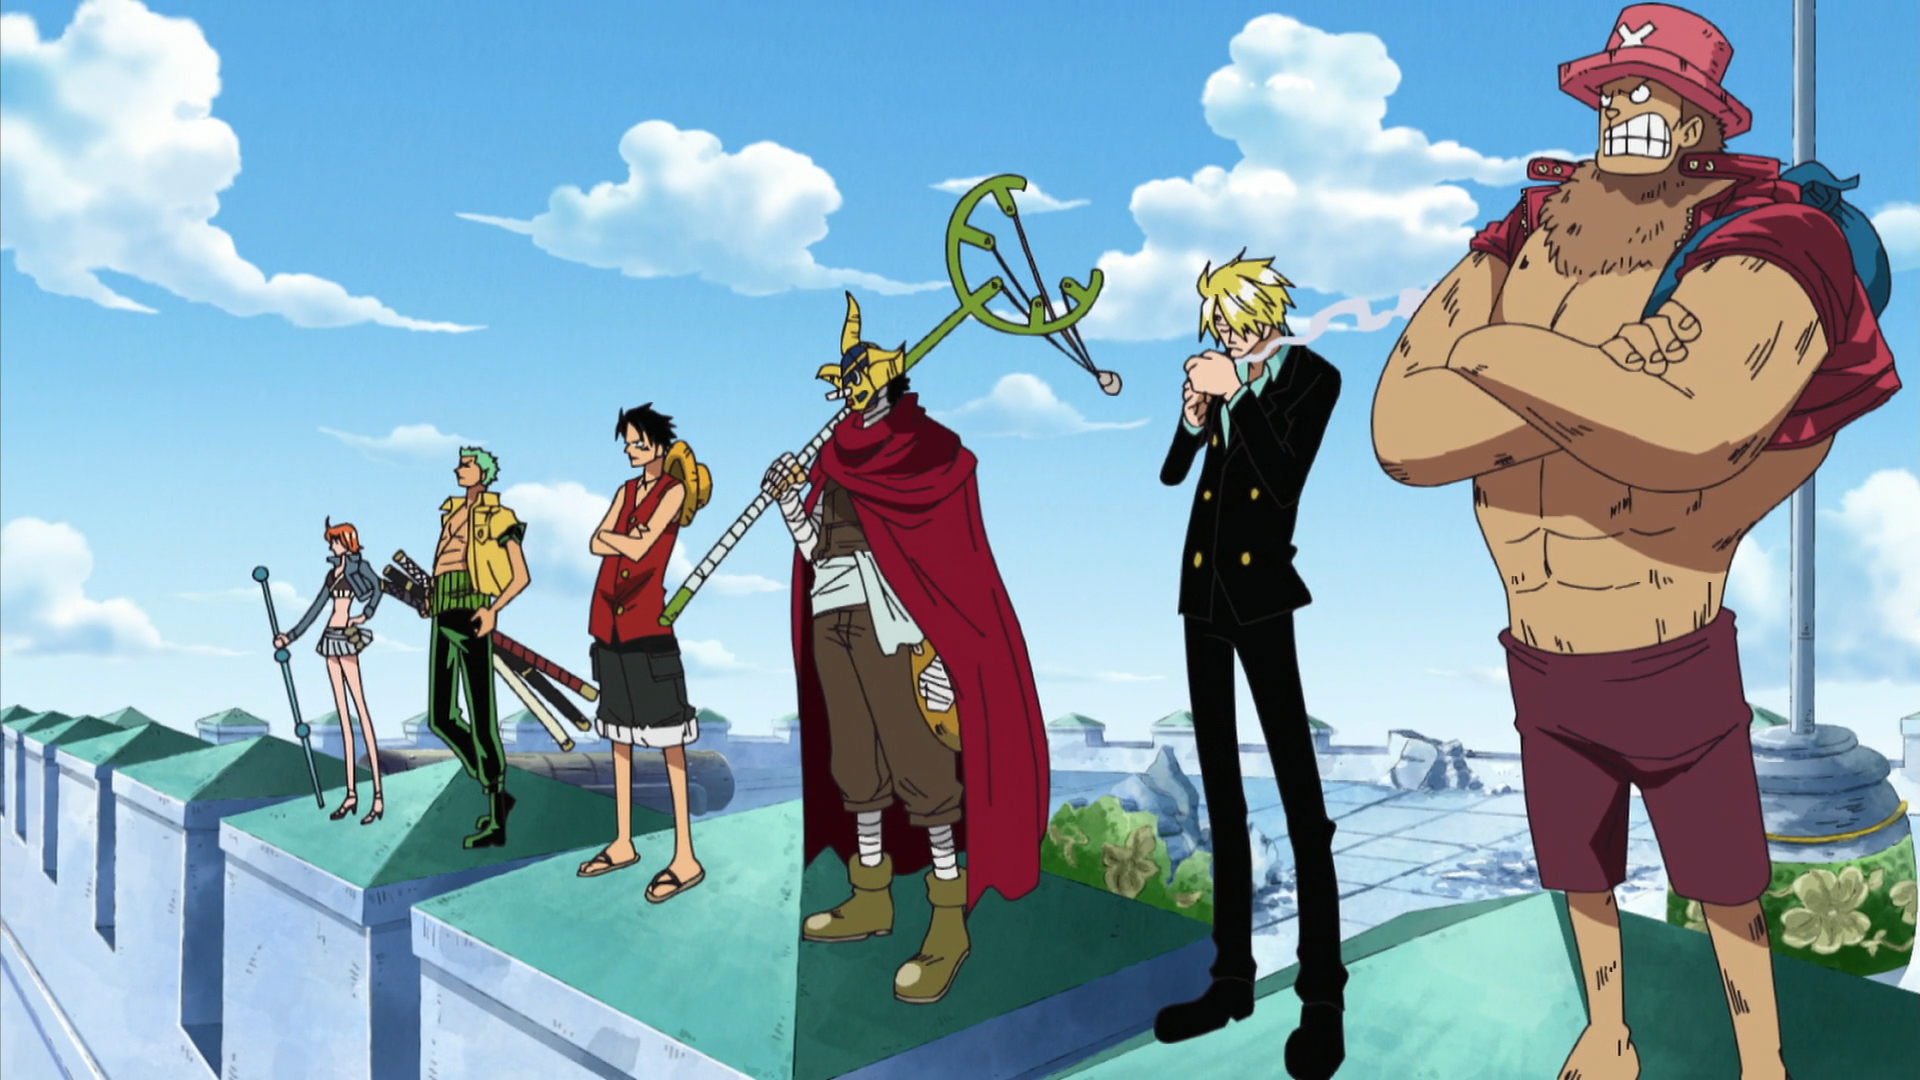 Straw_Hats_Stand_on_Courthouse.png